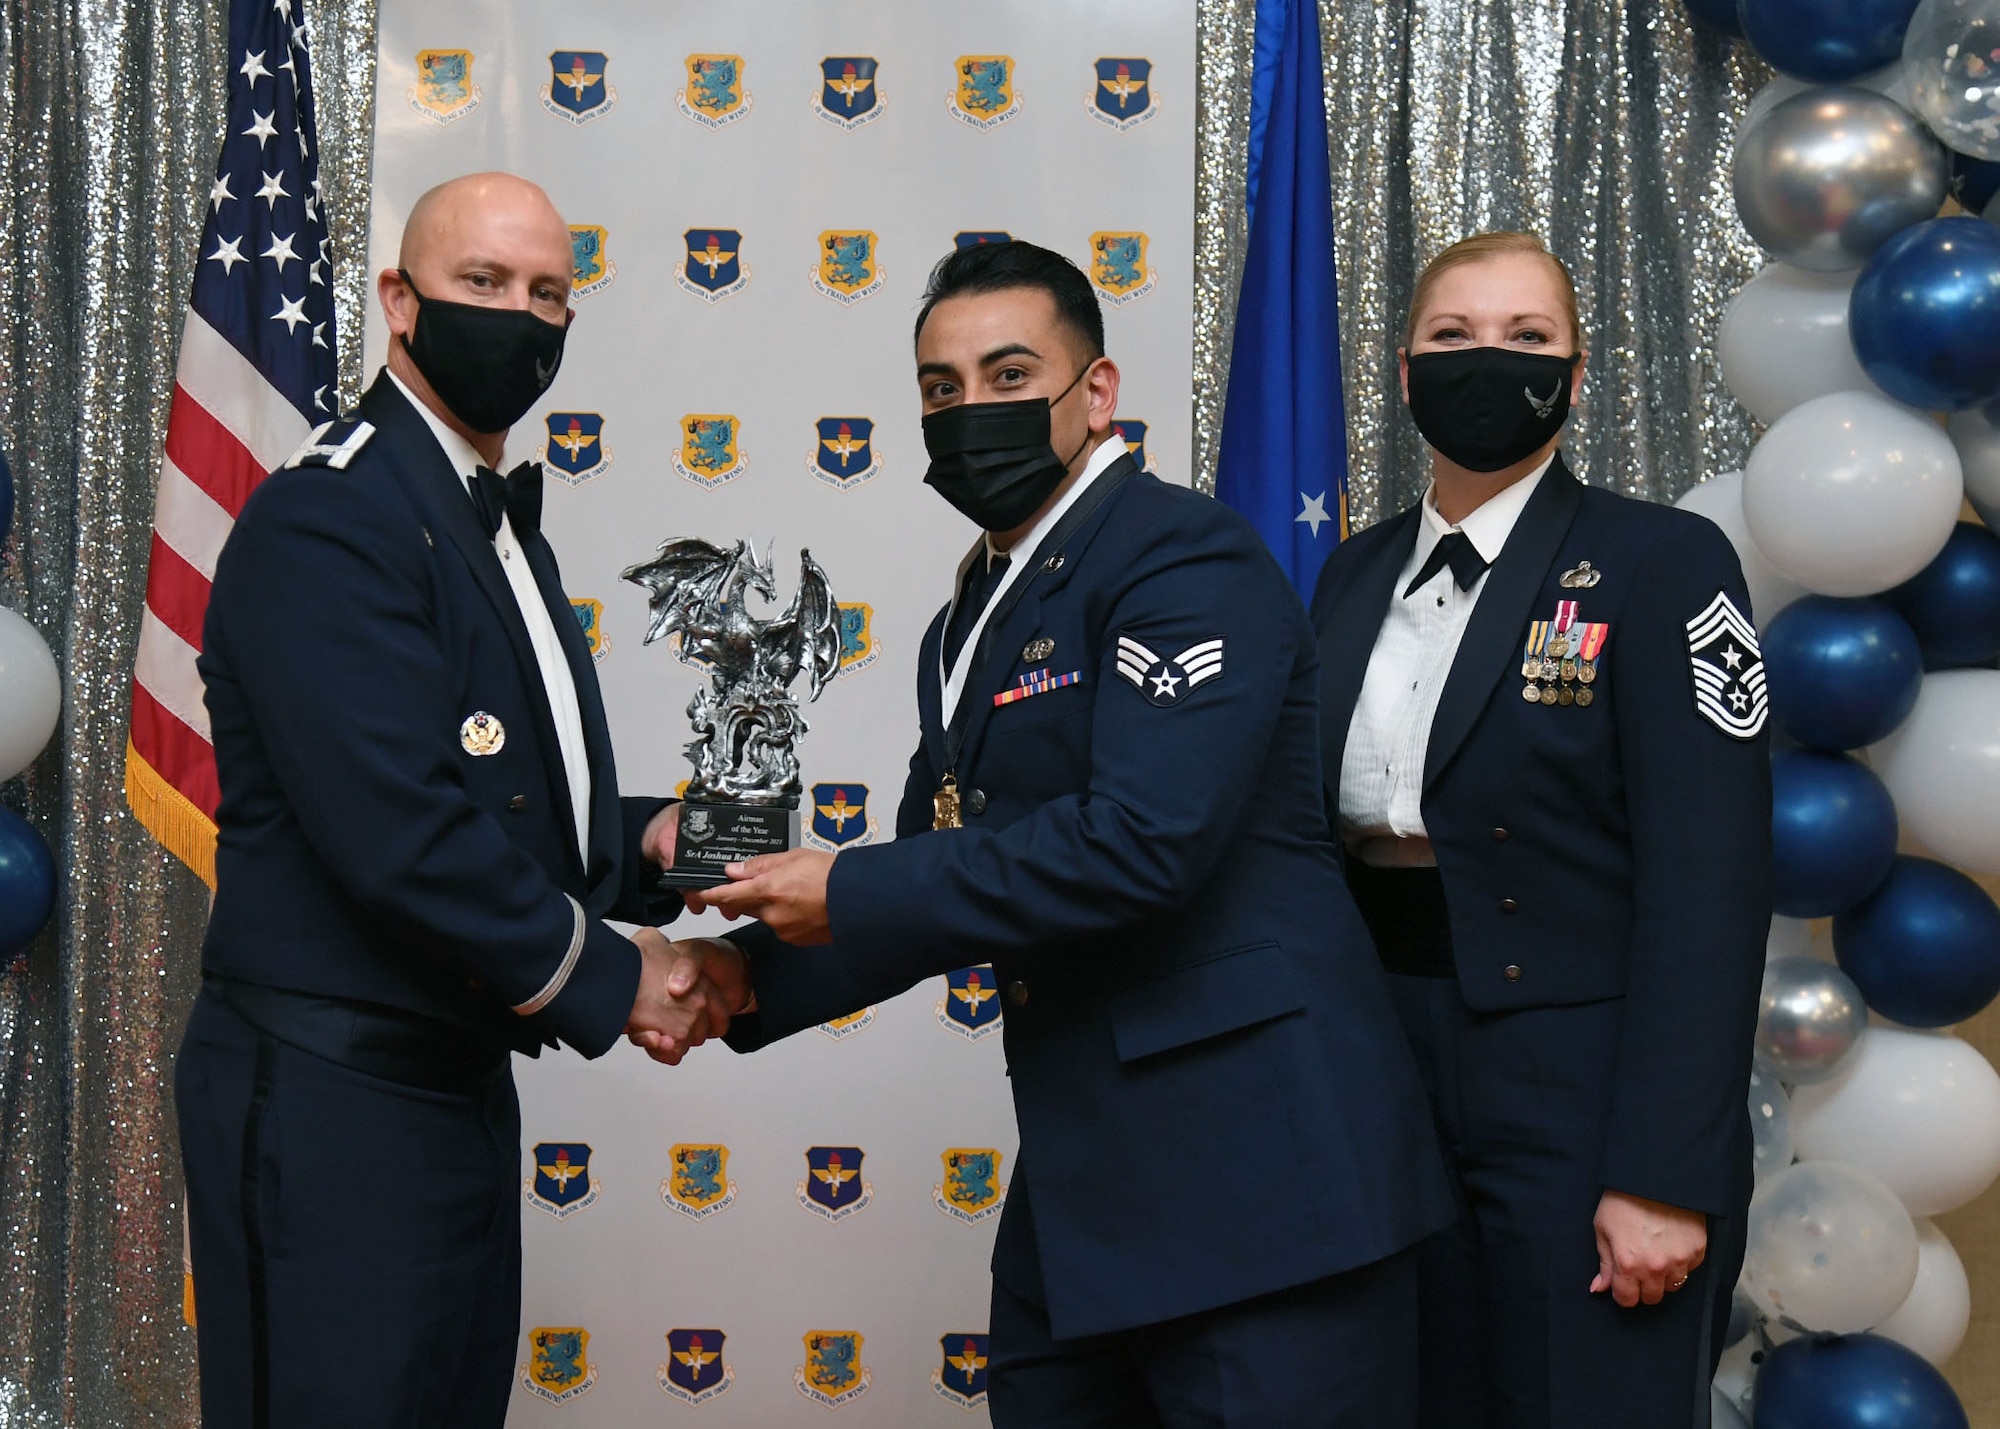 U.S. Air Force Col. William Hunter, 81st Training Wing commander, and Chief Master Sgt. Sarah Esparza, 81st TRW command chief, present Senior Airman Joshua Rodriguez, 81st Training Support Squadron cyber systems technician, with the Airman of the Year award during the 81st Training Wing's 2021 Annual Awards Ceremony inside the Bay Breeze Event Center at Keesler Air Force Base, Mississippi, Feb. 17, 2022. During the ceremony, base leadership recognized outstanding Airmen and civilians from across the installation for their accomplishments throughout 2021. (U.S. Air Force photo by Kemberly Groue)